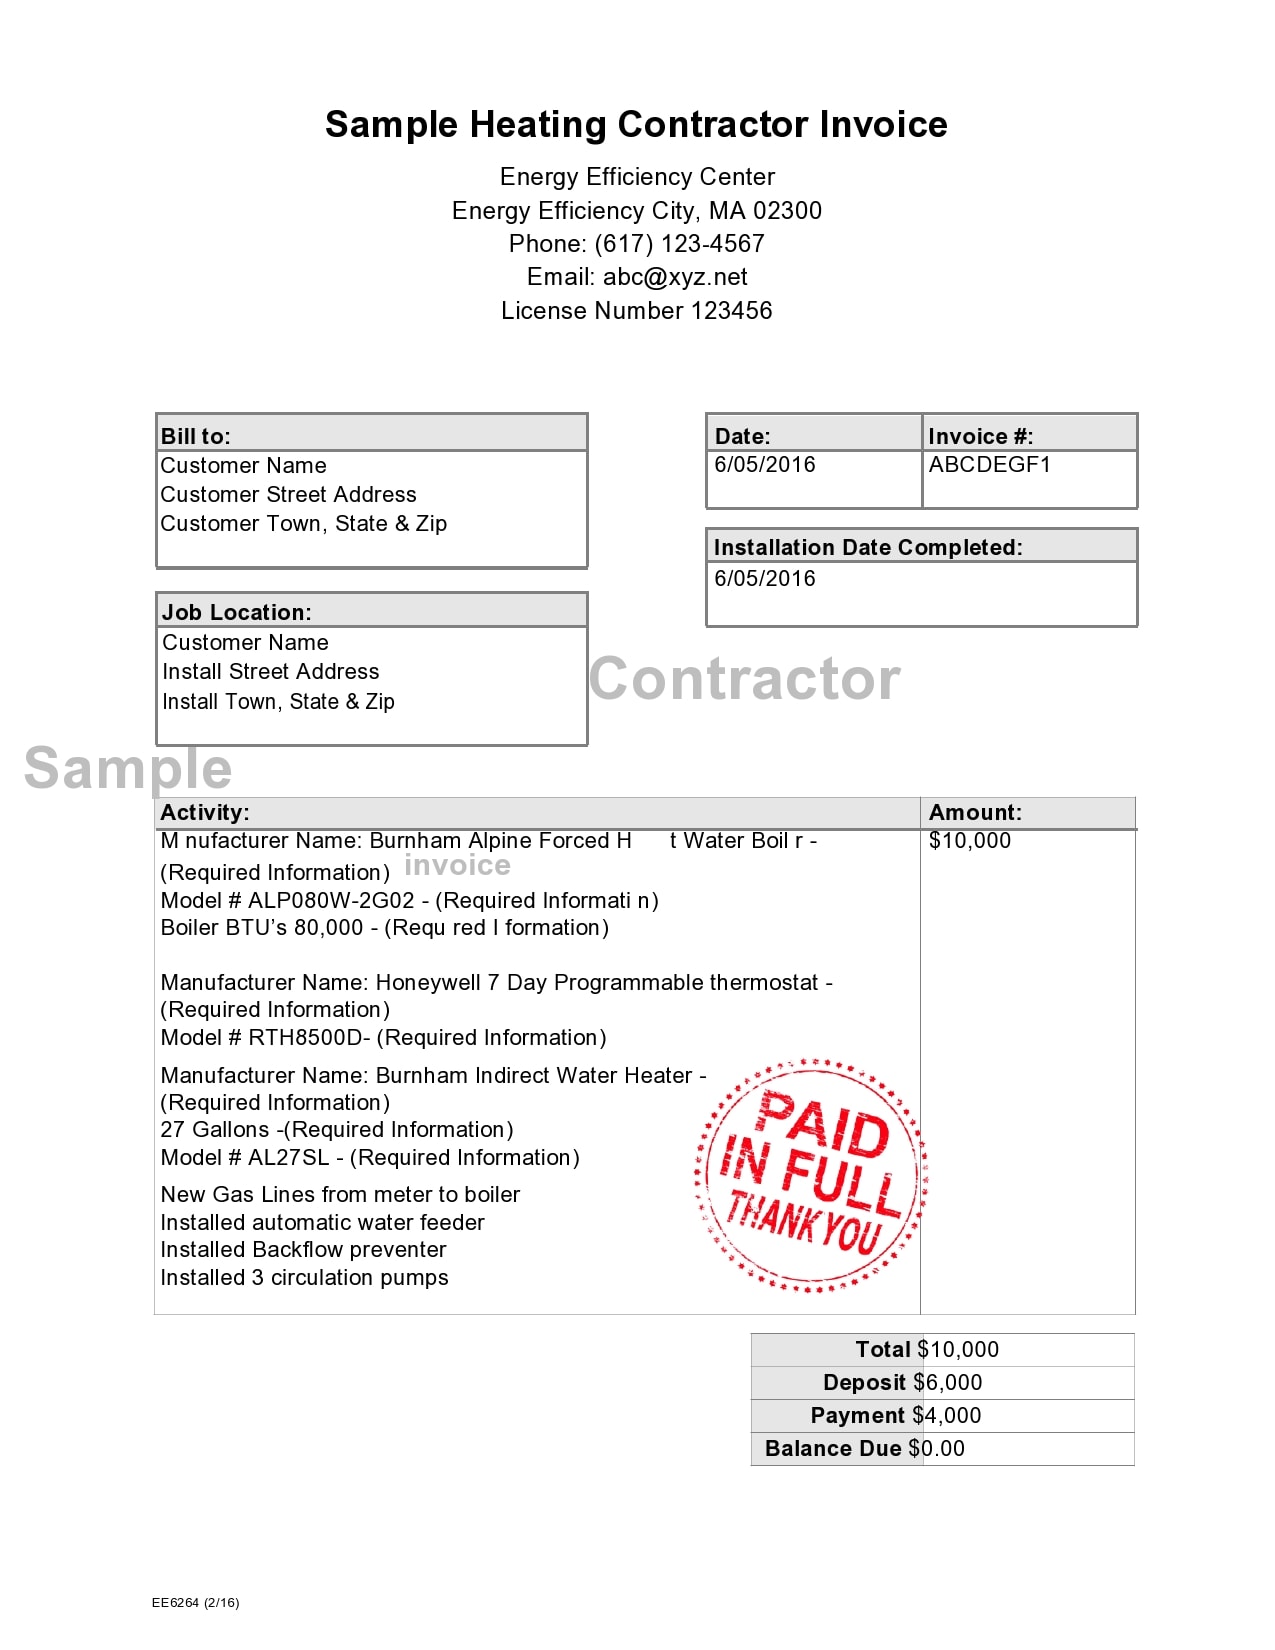 28 Independent Contractor Invoice Templates (FREE)